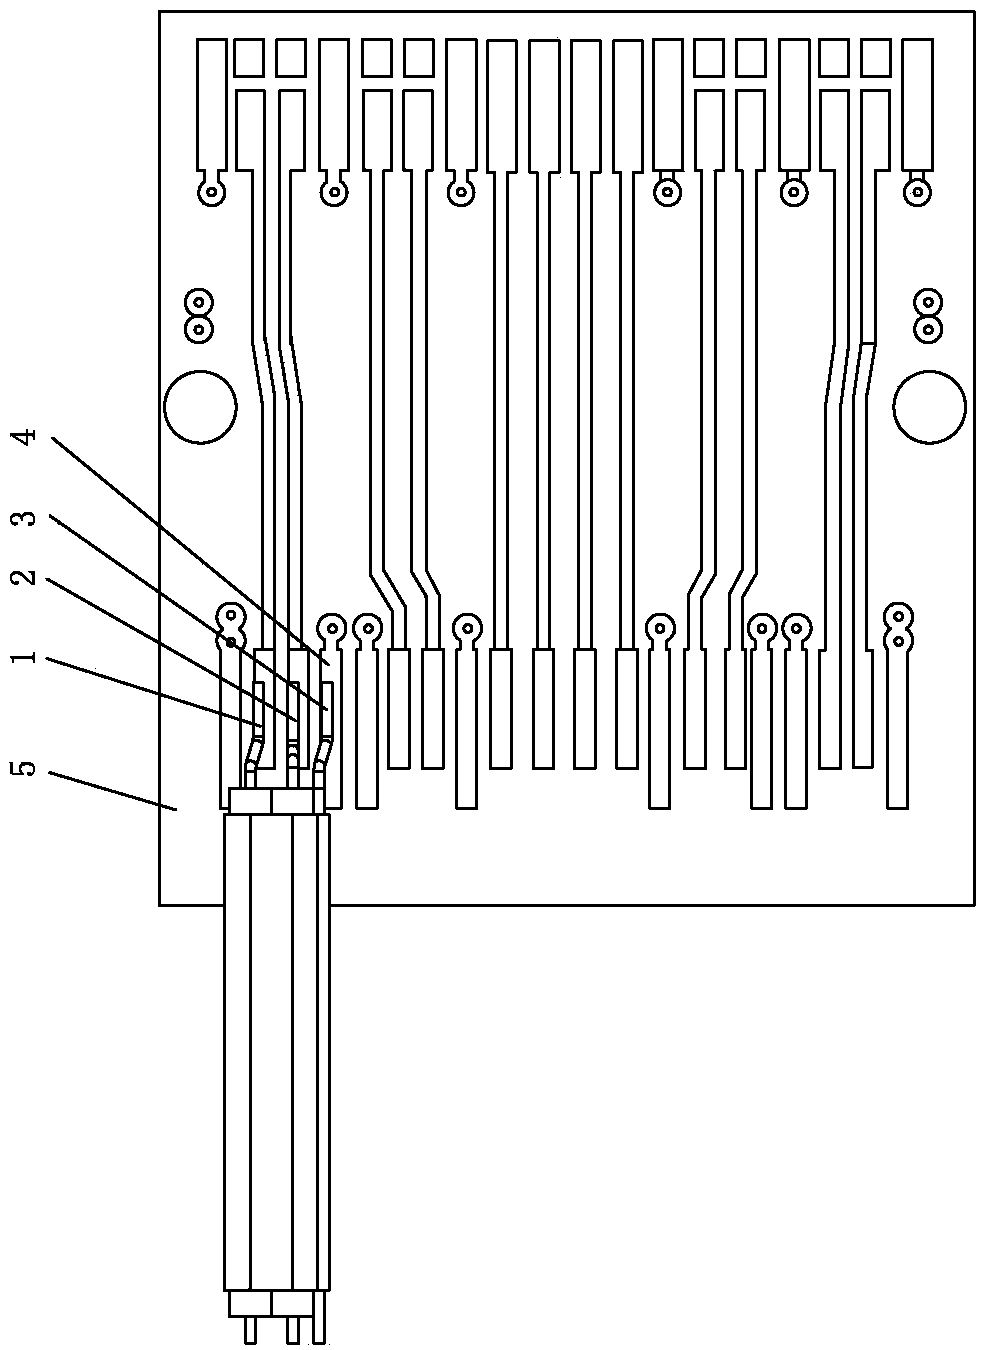 Connection structure of cable and printed circuit board (PCB)